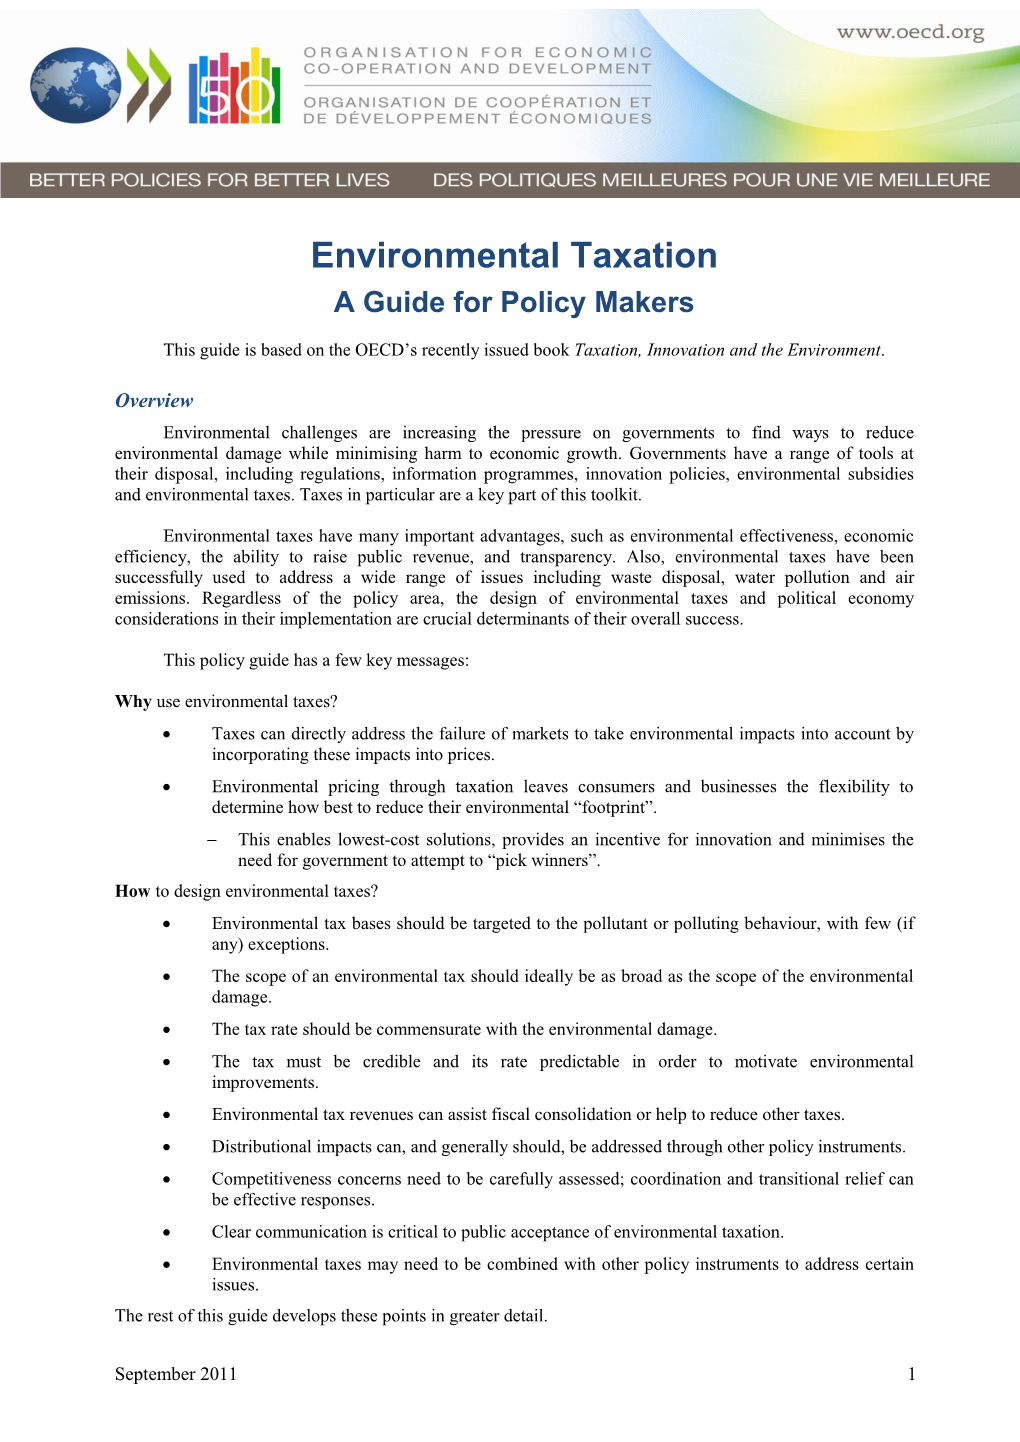 Environmental Taxation a Guide for Policy Makers